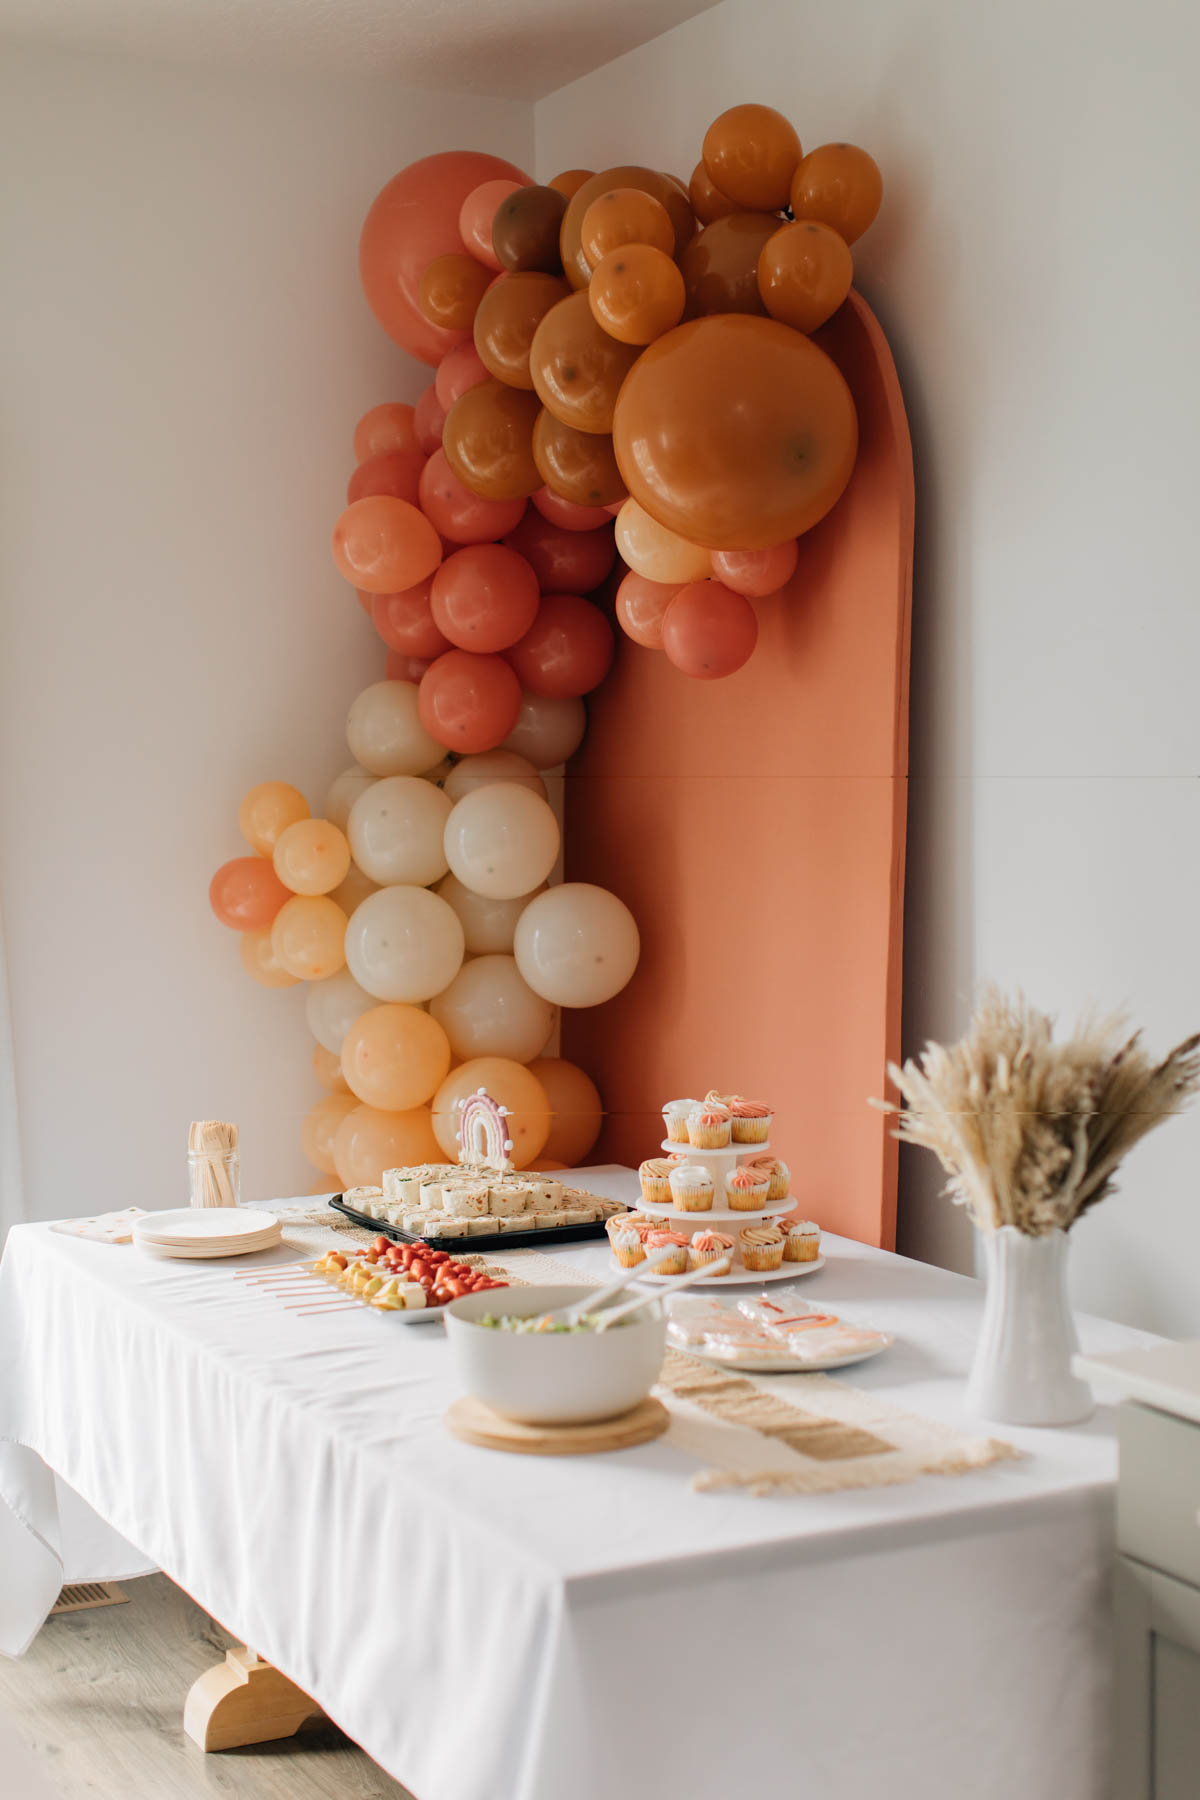 Food table with cupcakes and pampas grass vase in front of arch decor with balloon garland.